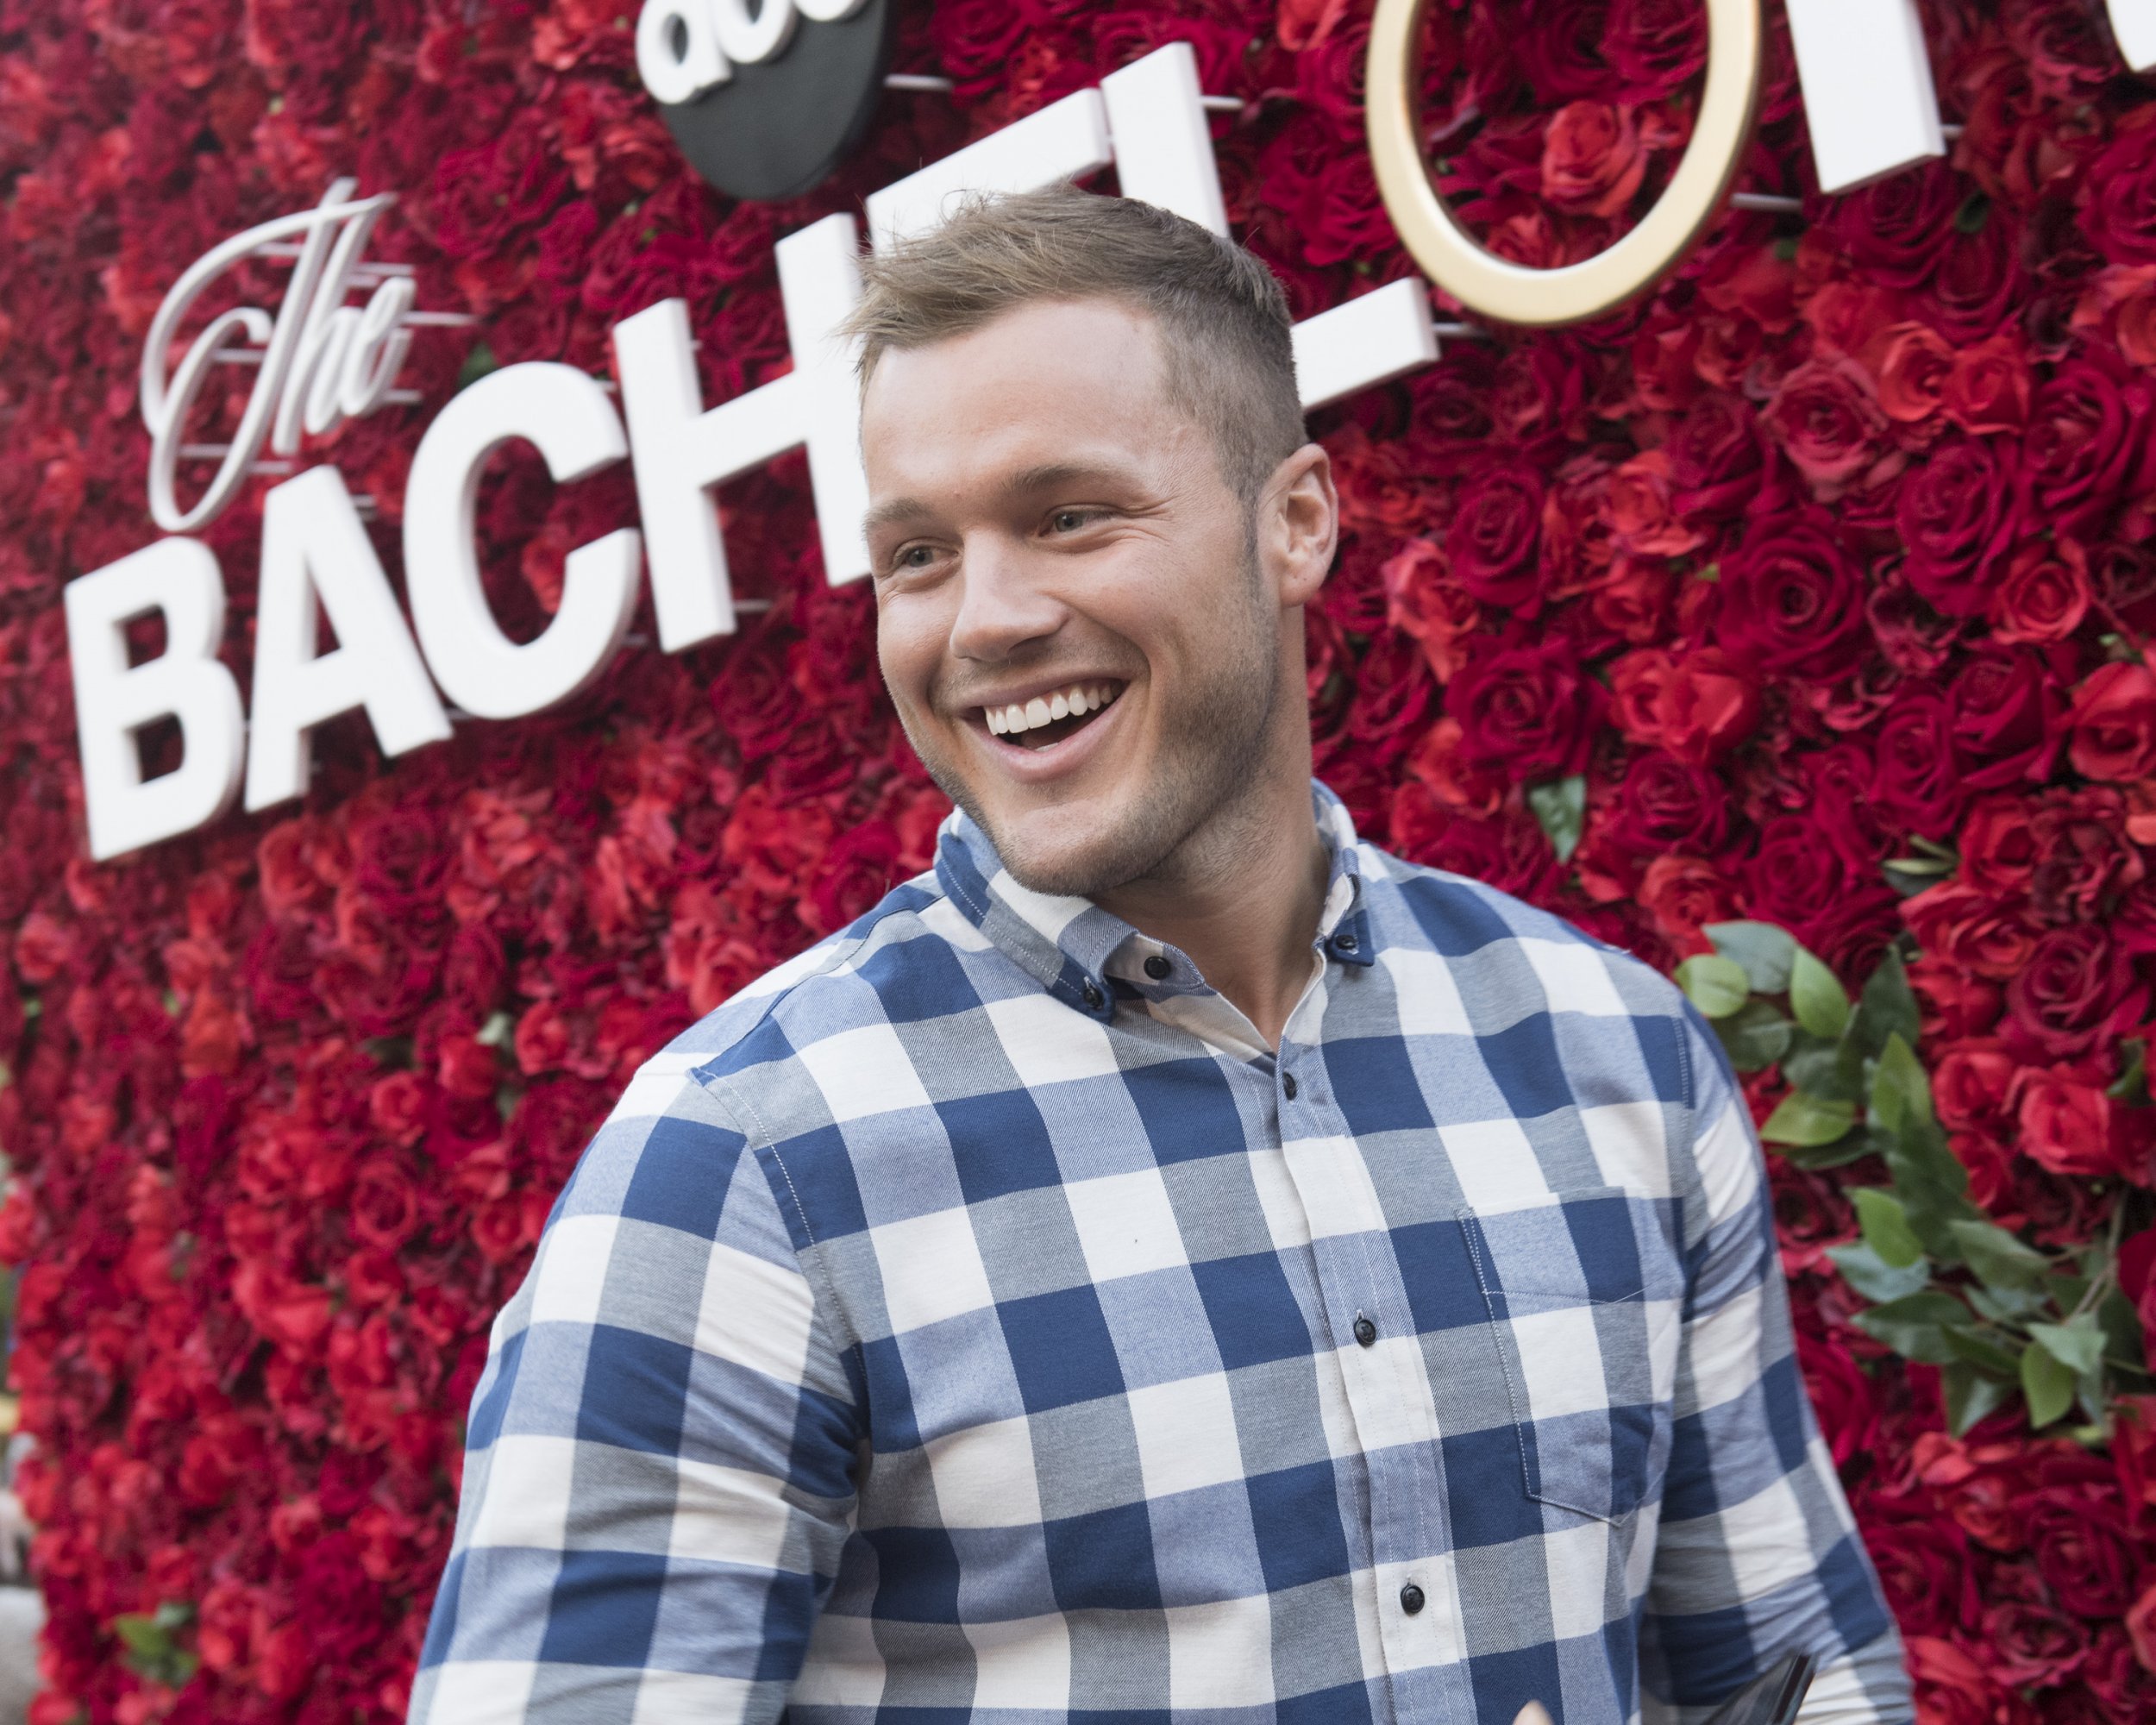 Colton Bachelor Ending: Is He With Cassie?